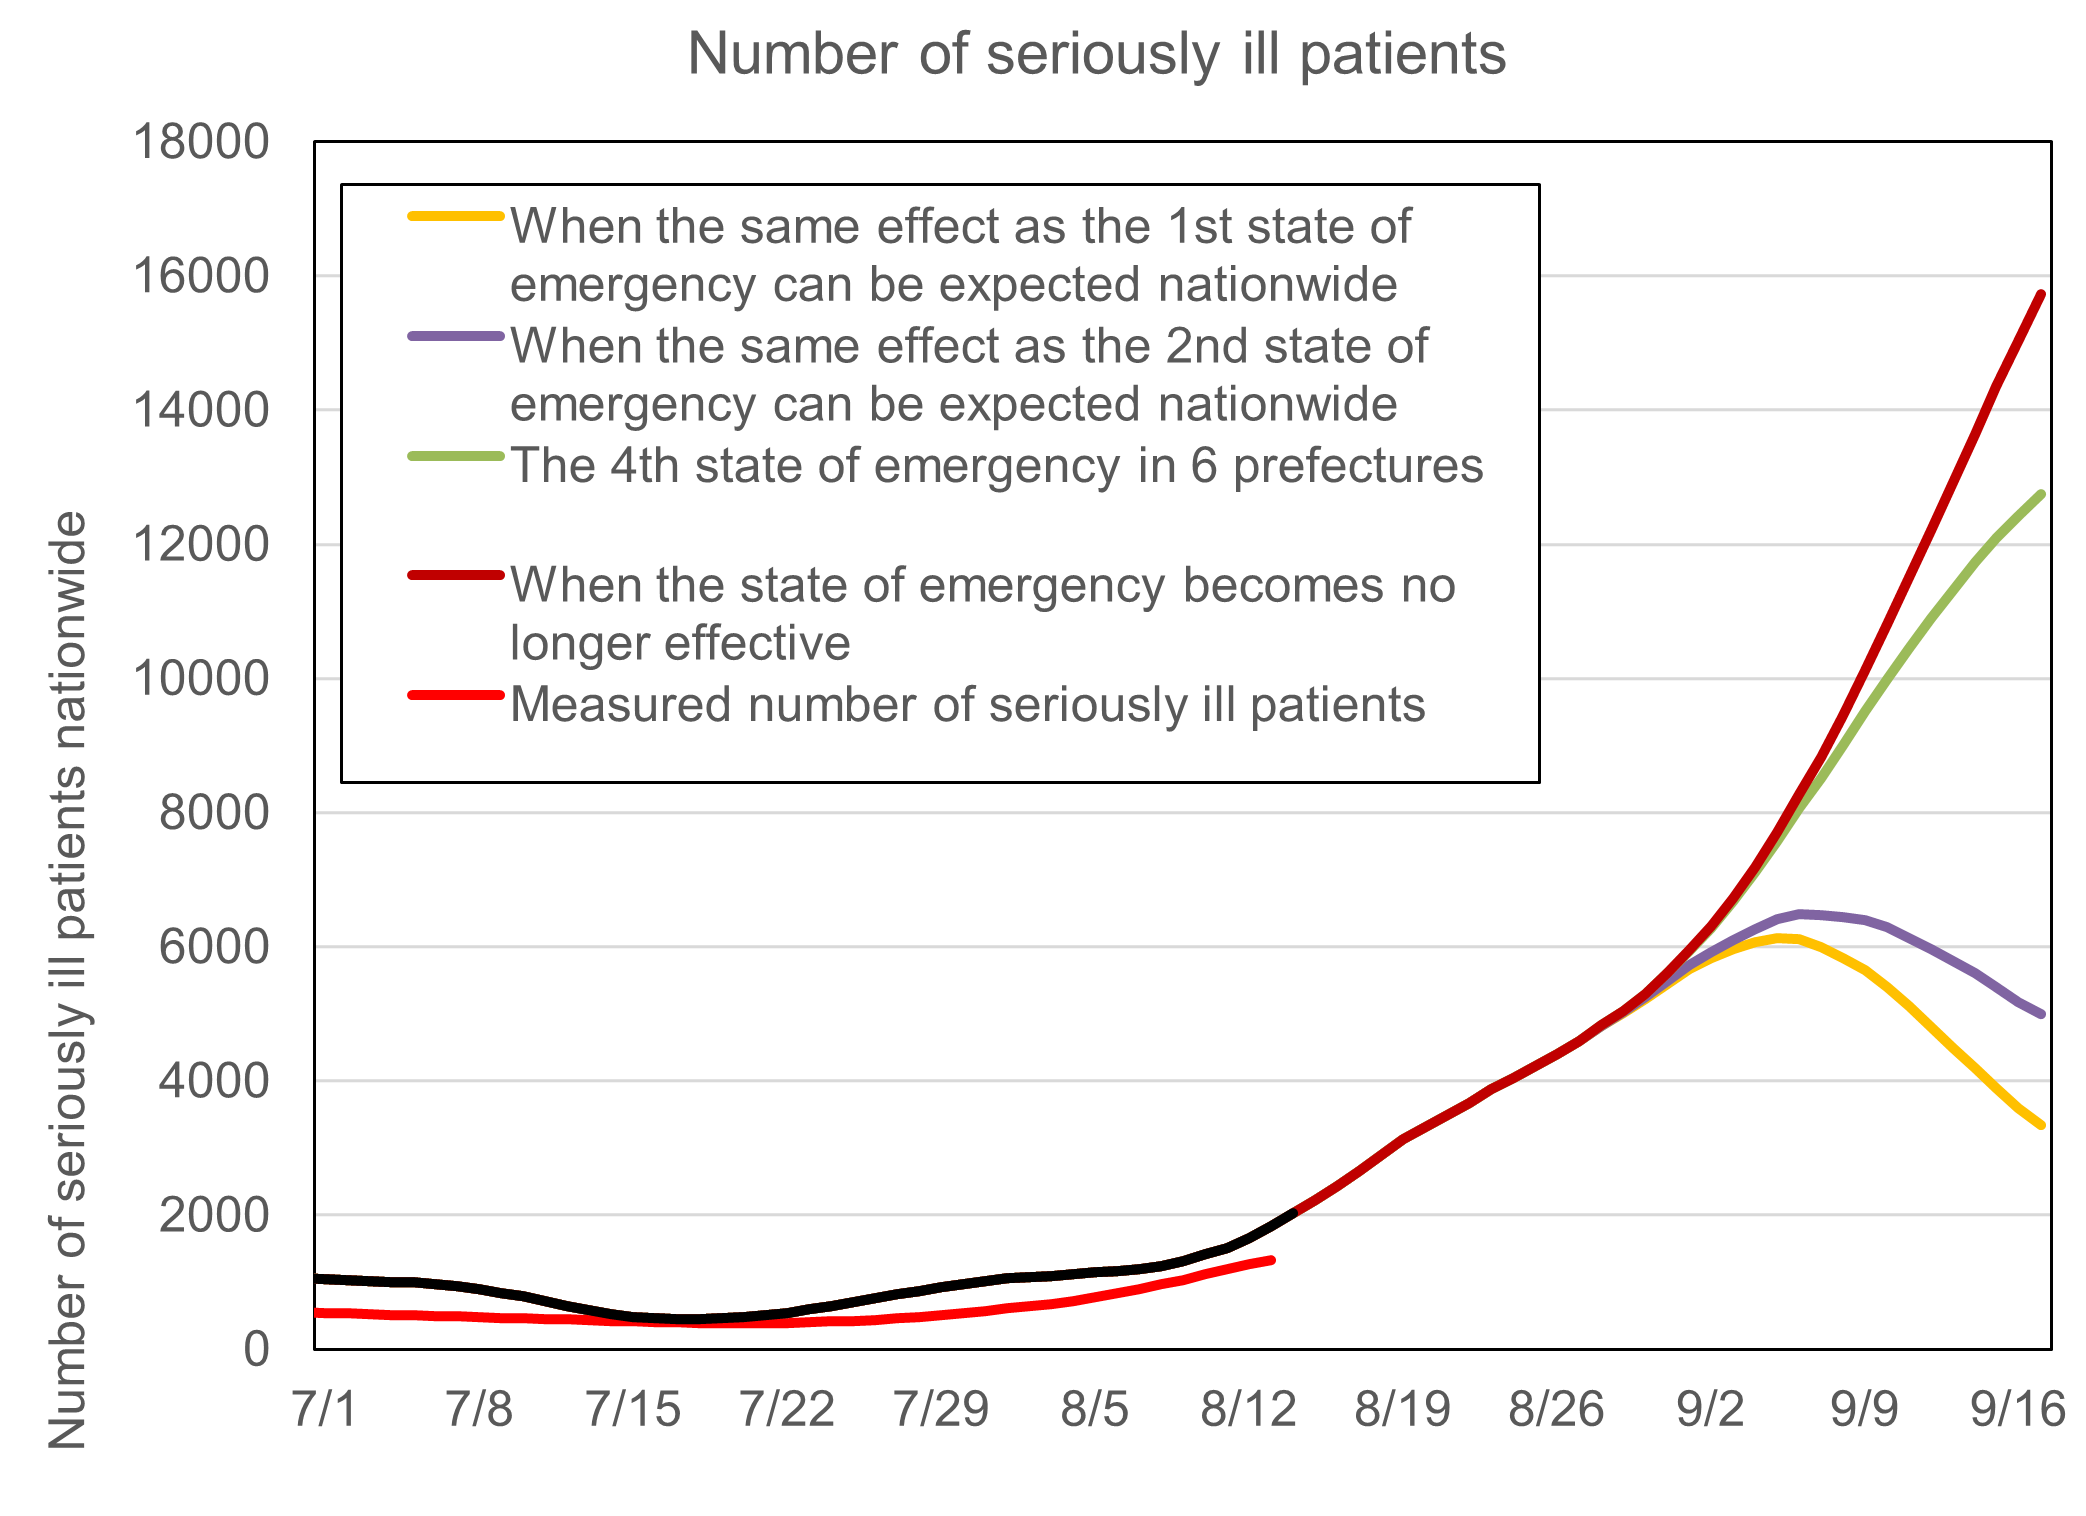 Number of seriously ill patients